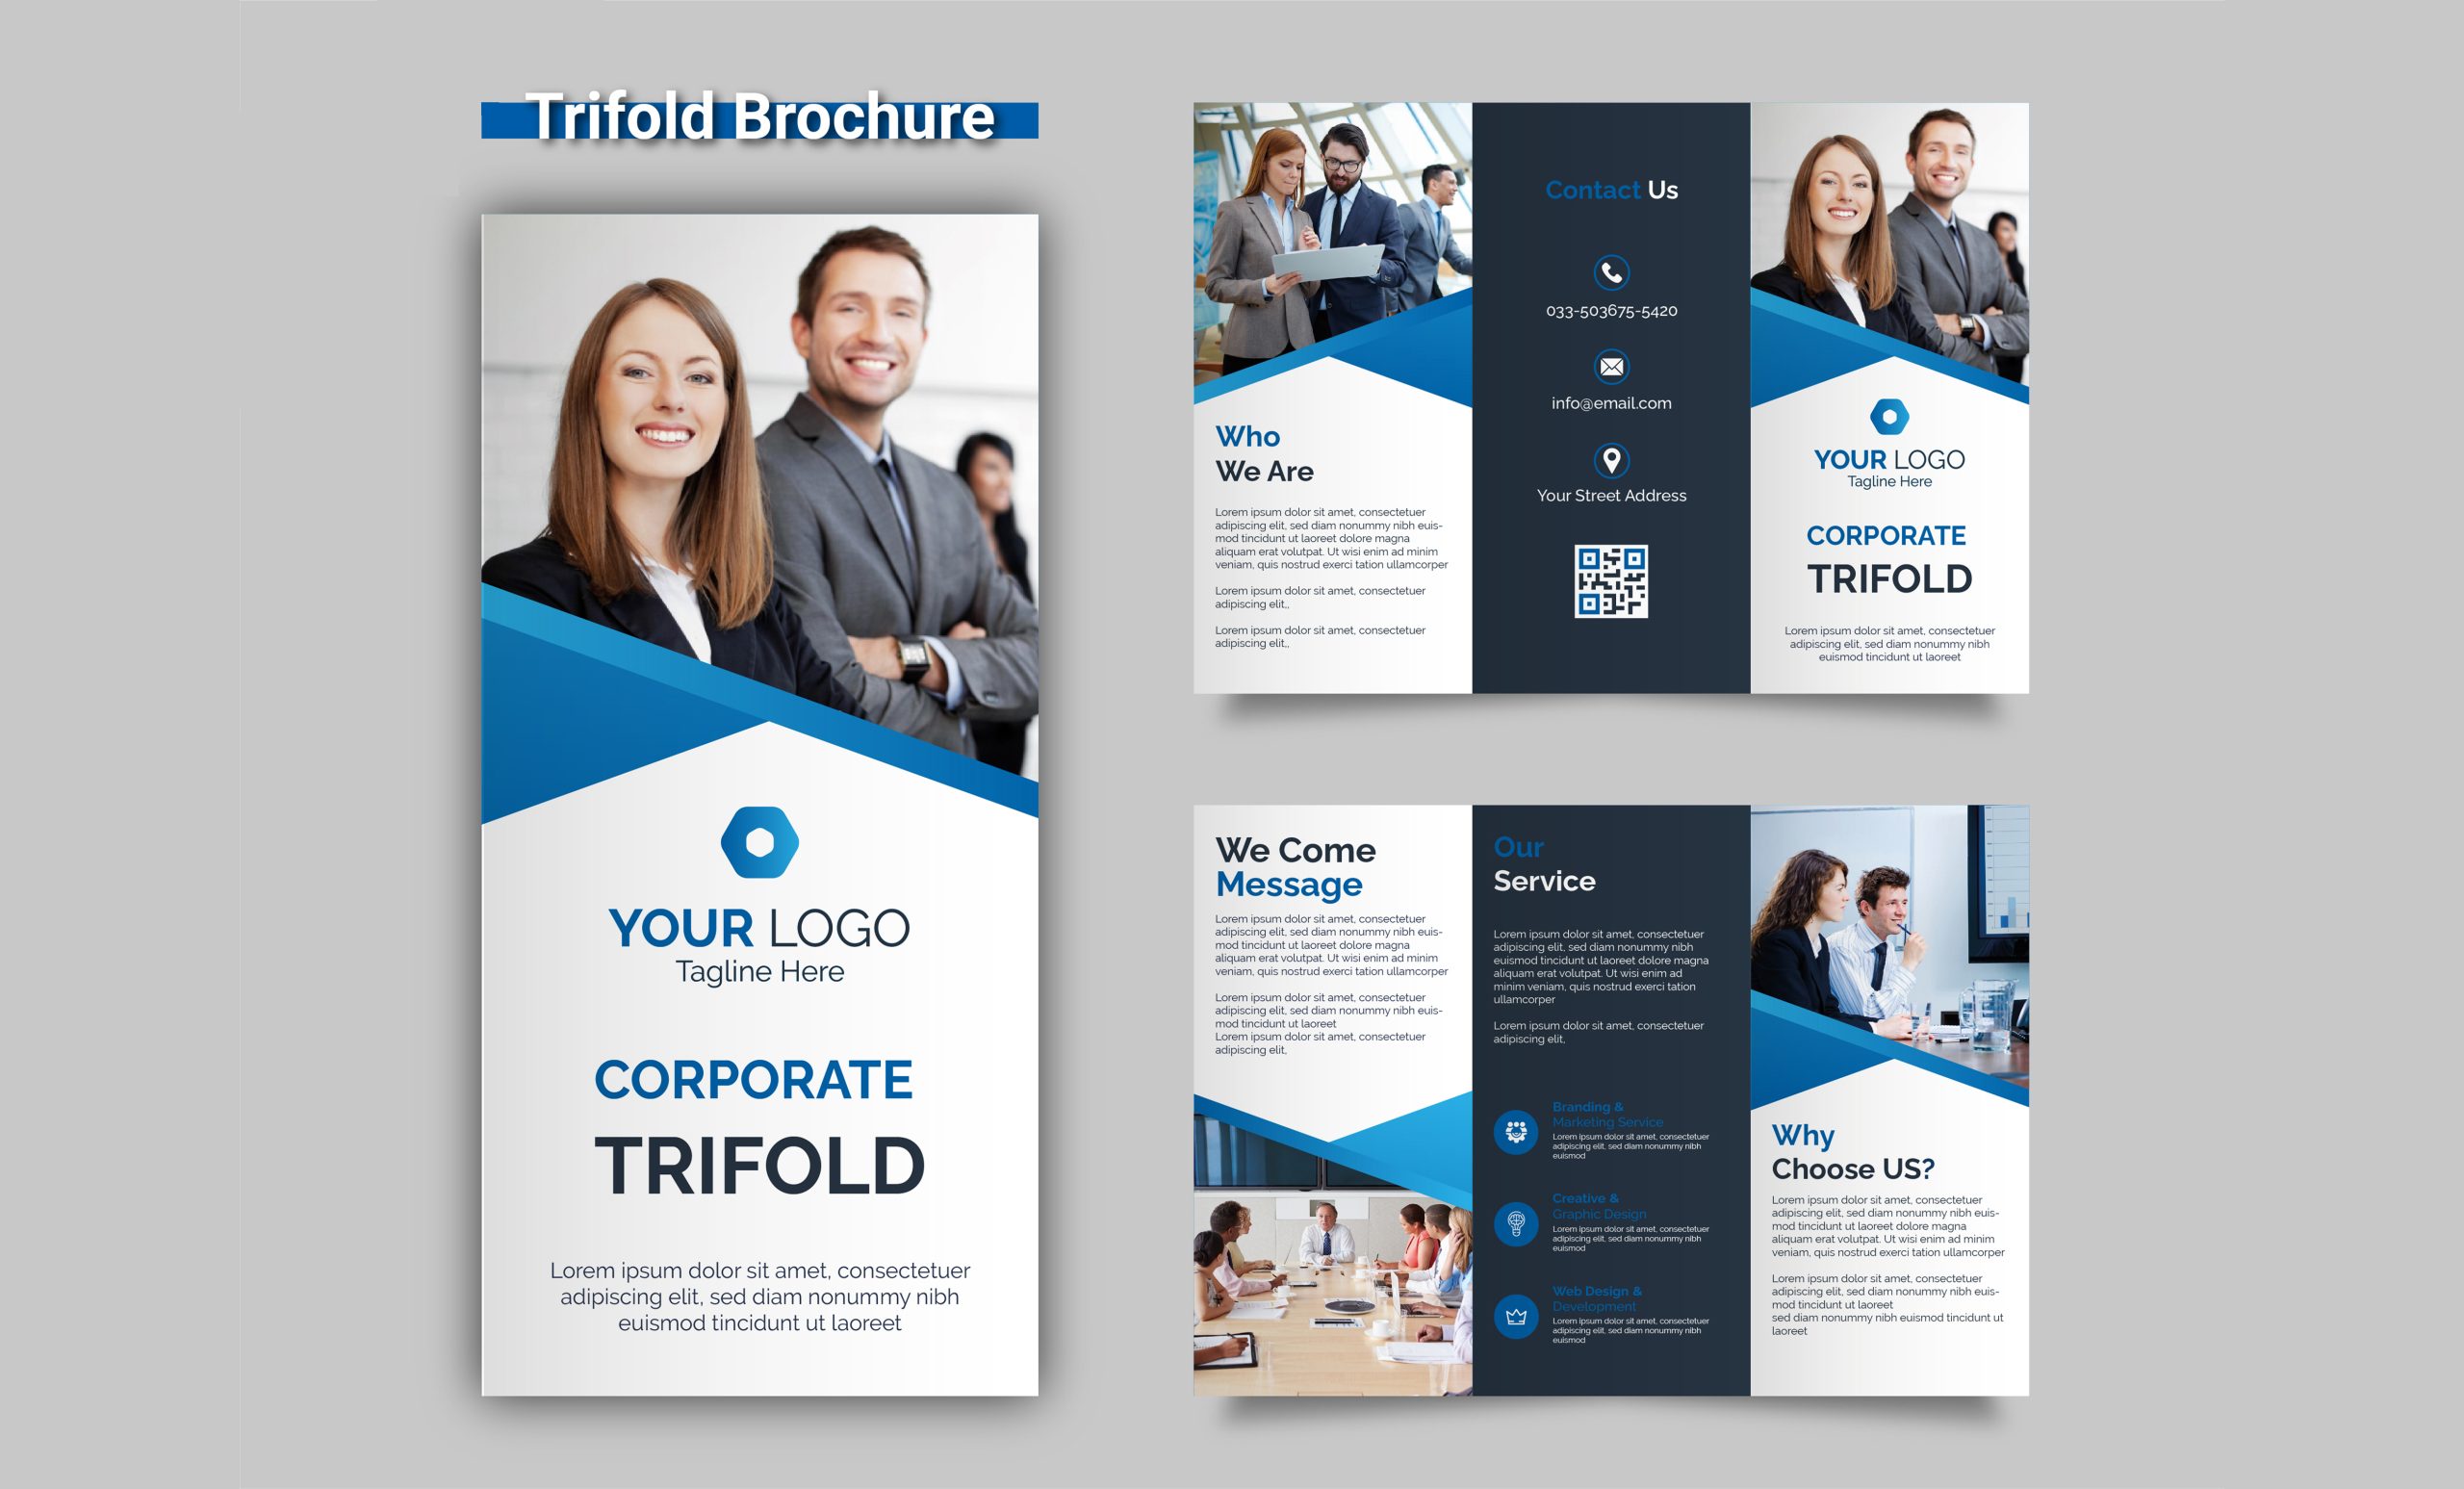 Trifold Brochure Template 03 scaled